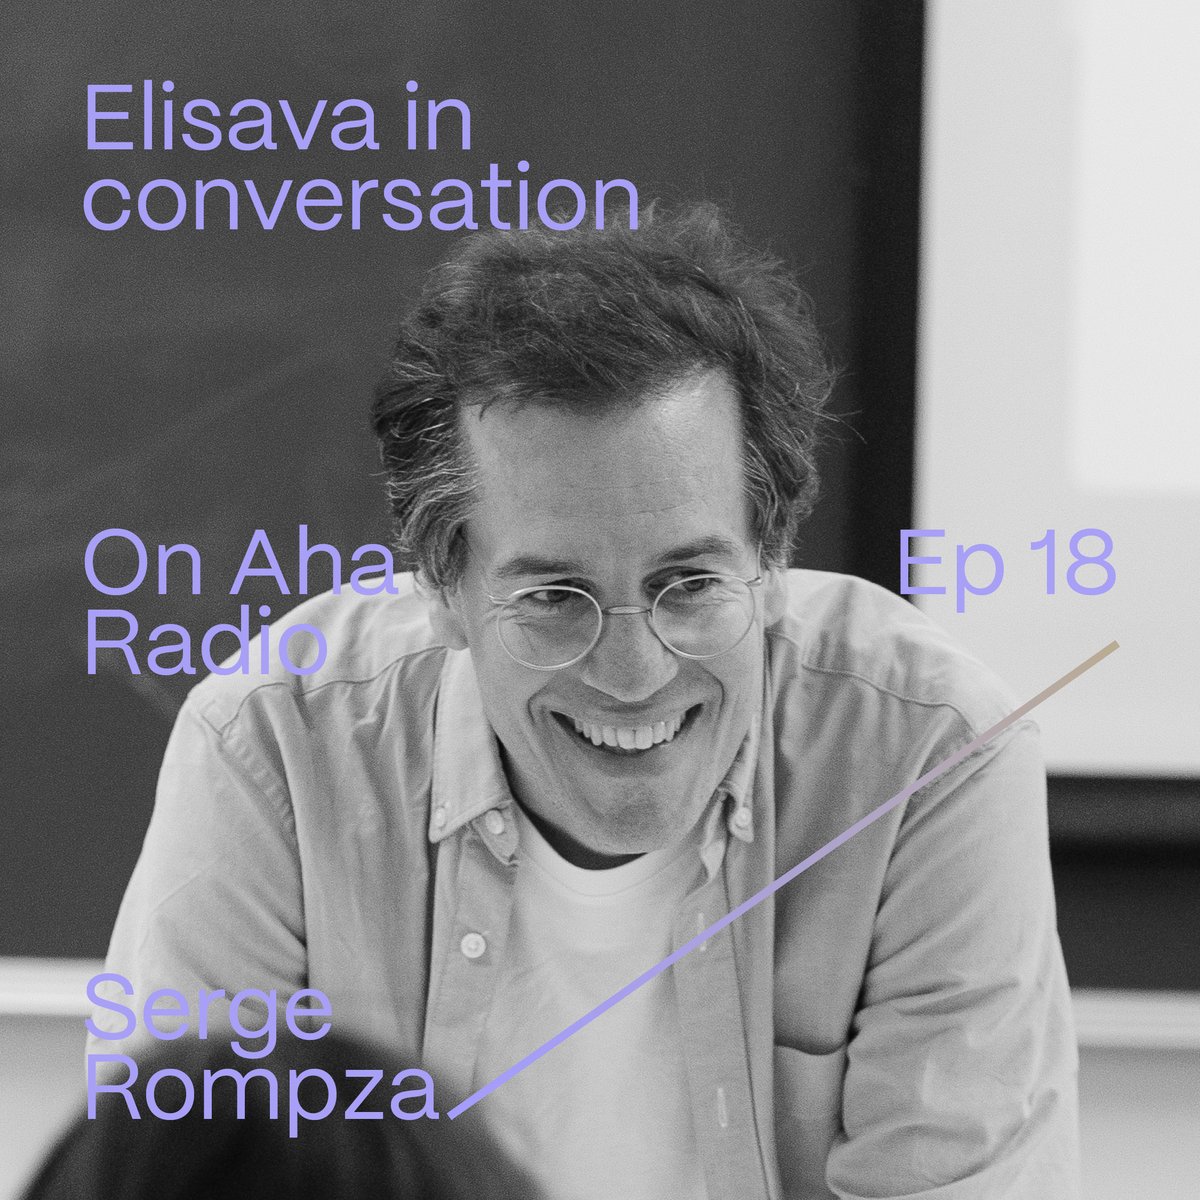 🗣 New podcast interview with Serge Rompza, co-founder of @nodeberlinoslo design studio and teacher of @graphic_elisava. 🎧 Listen to it on: Spotify: shorturl.at/jSBuZ iVoox: shorturl.at/O107R Mixcloud: shorturl.at/6f7eU #Podcast #Interview #GraphicDesign